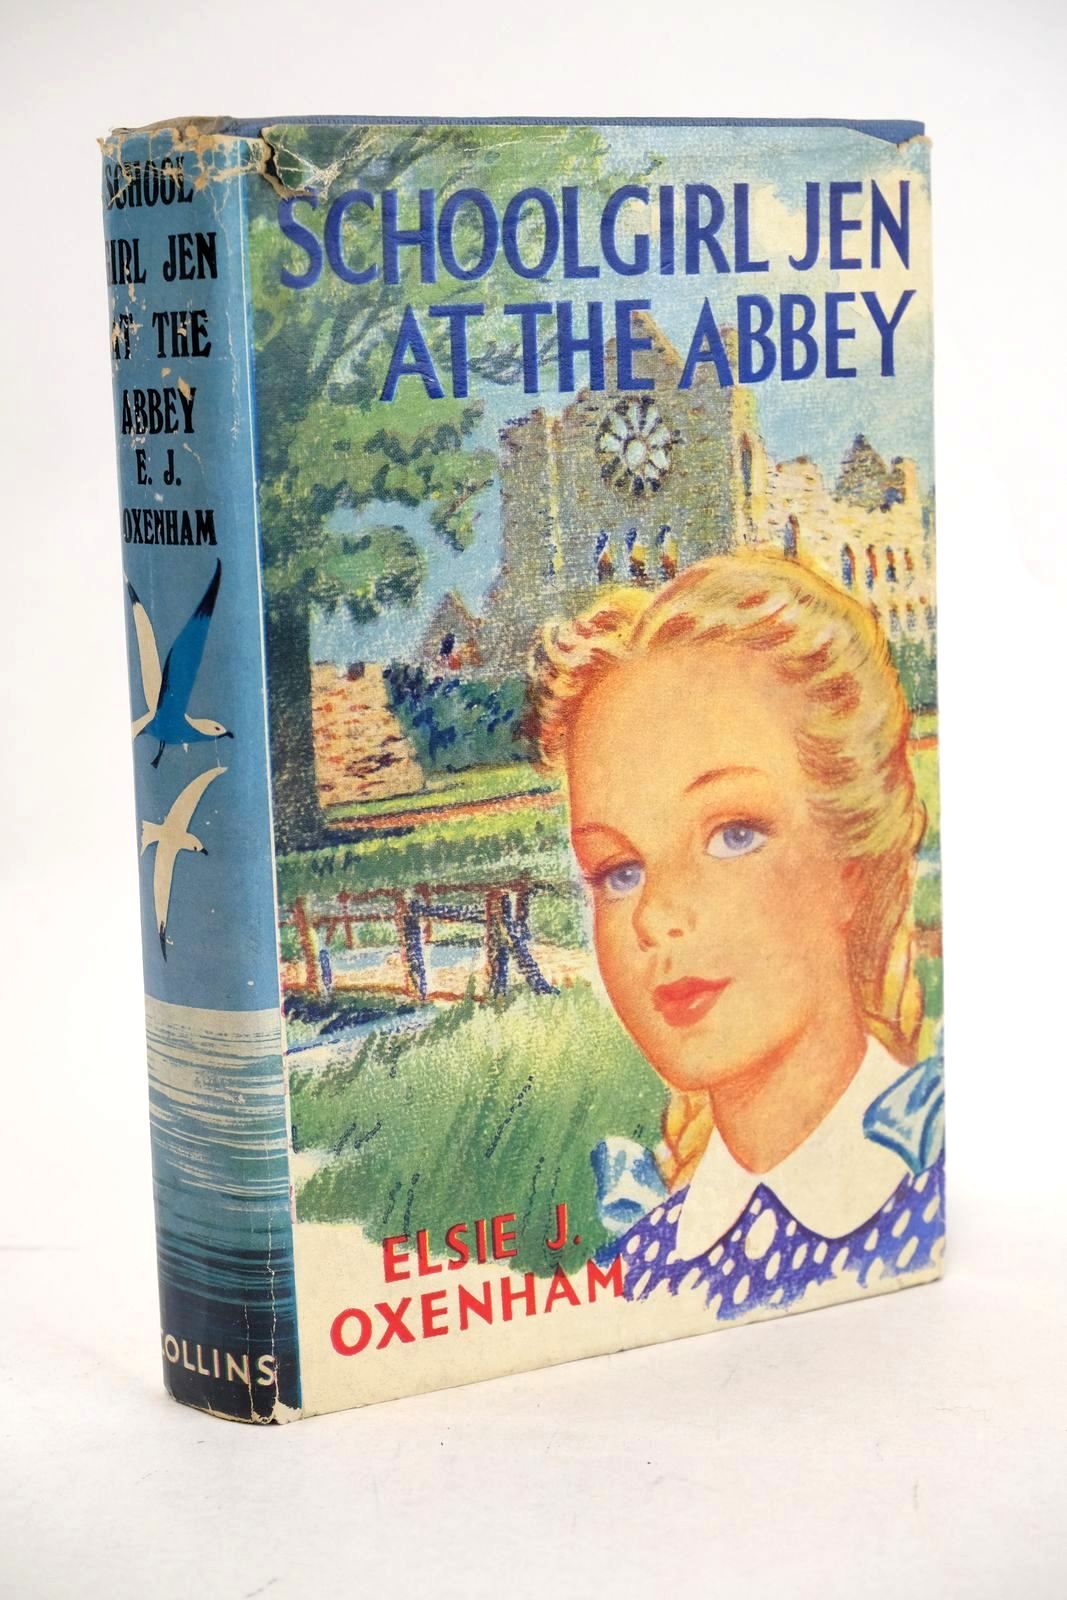 Photo of SCHOOLGIRL JEN AT THE ABBEY written by Oxenham, Elsie J. published by Collins (STOCK CODE: 1326832)  for sale by Stella & Rose's Books